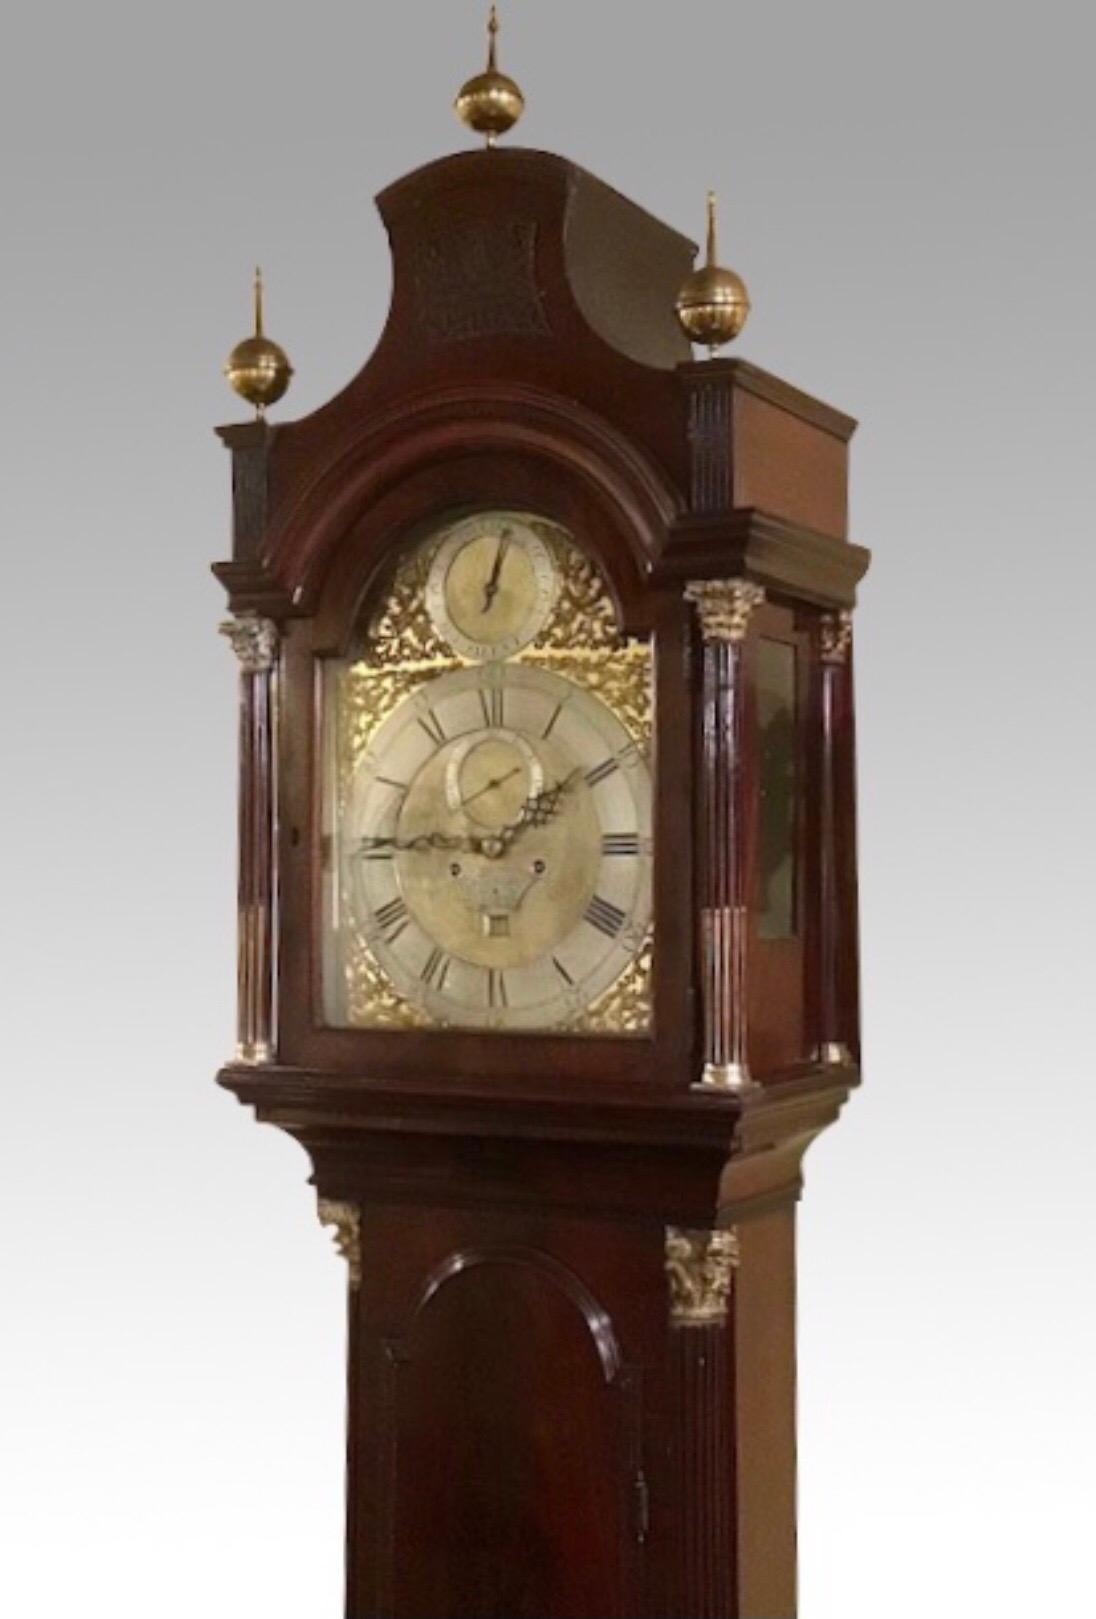 Fabulous Georgian Antique London Longcase Grandfather clock. Thomas Mudge, London Circa 1765
The spectacular mahogany case has a long trunk door and is flanked by reeded and brass inlaid quarter pillars. The base has raised shaped panel and typical